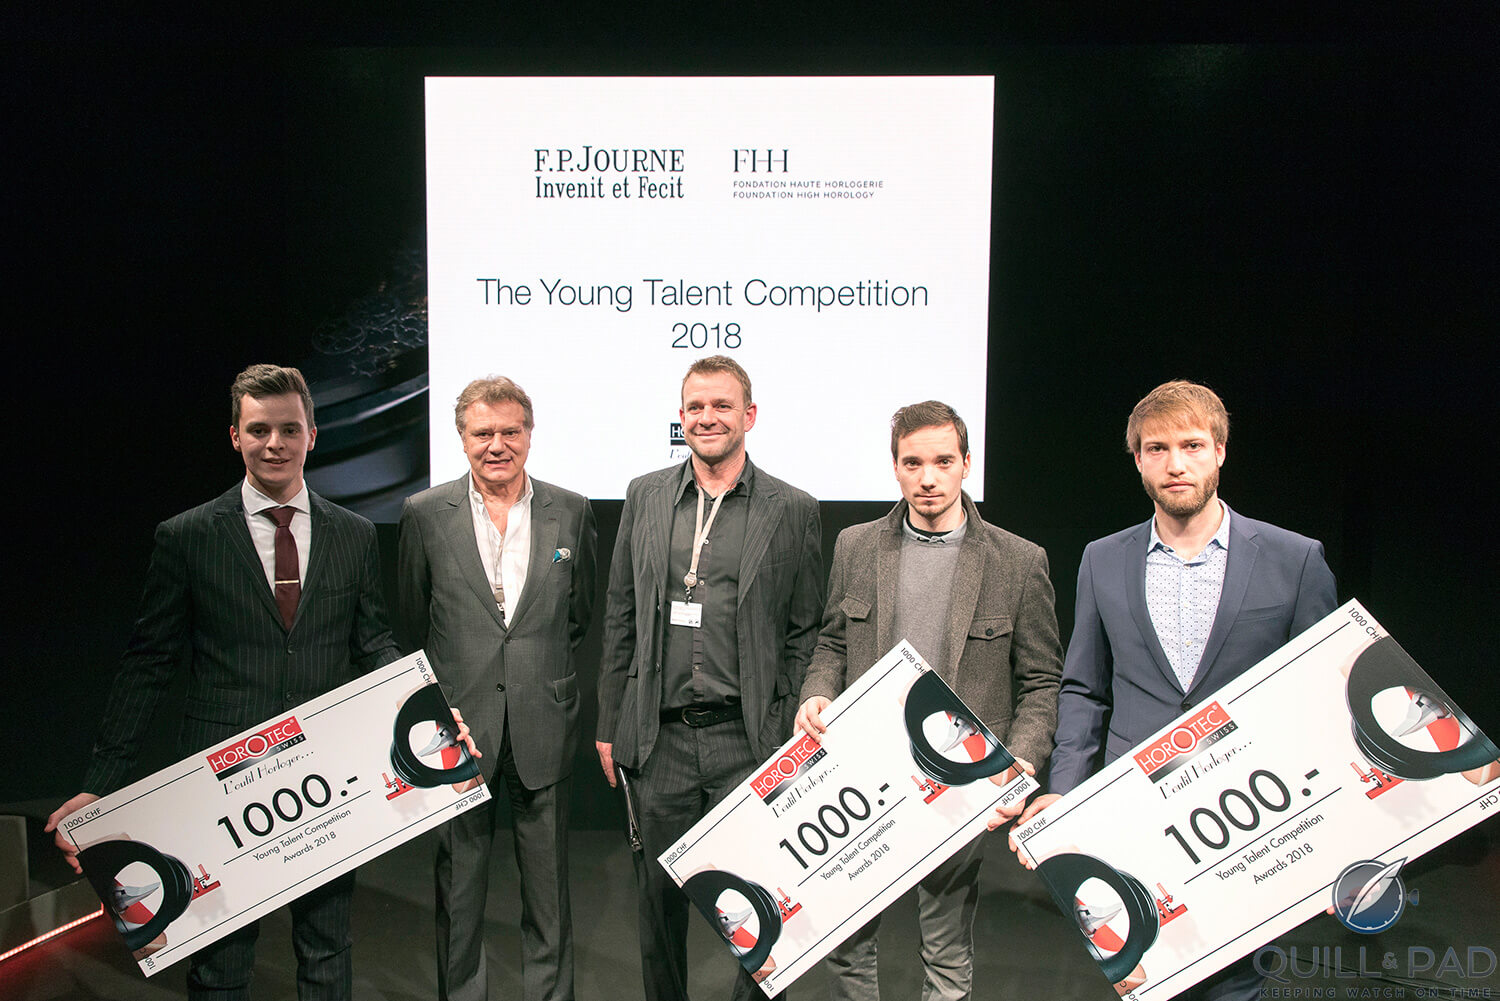 Winners of the 2017 F.P. Journe-FHH Young Talent Competition and award givers: L-R Rémy Cools, François-Paul Journe, Eric Zuccatti (Horotec), Théo Auffrey and Charles Routhier 